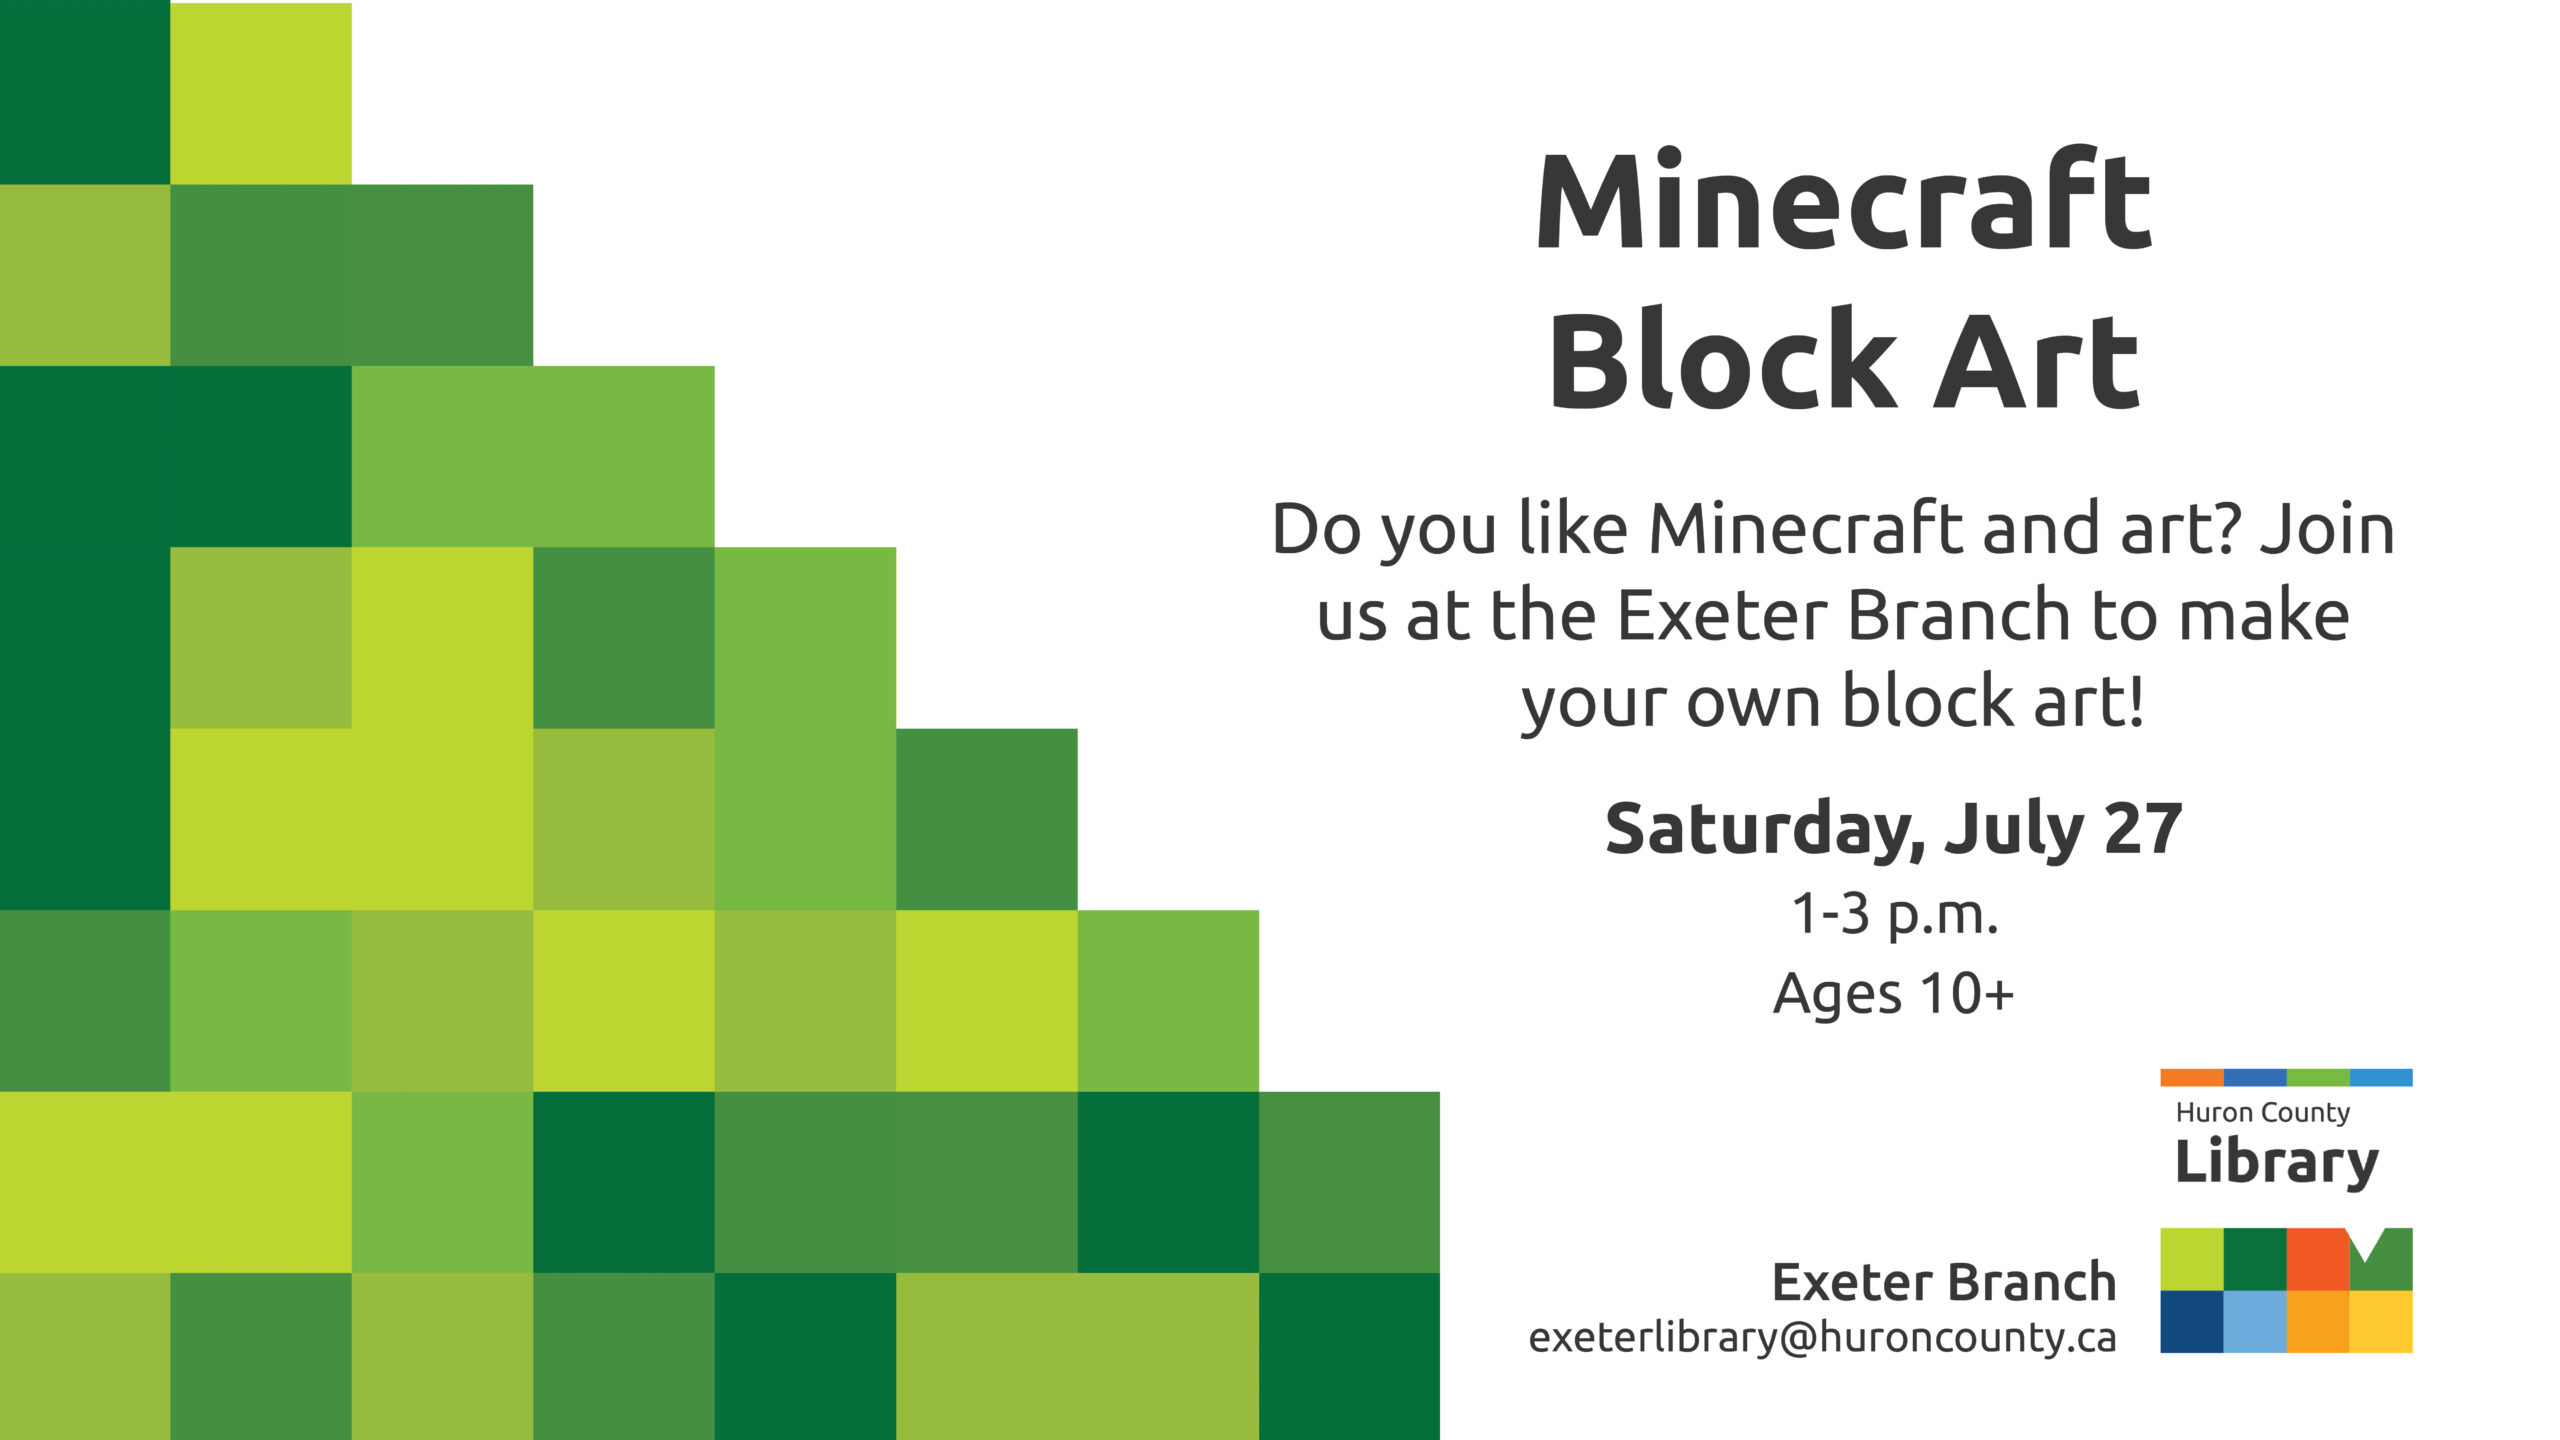 Coloured blocks with text promoting Minecraft art at Exeter